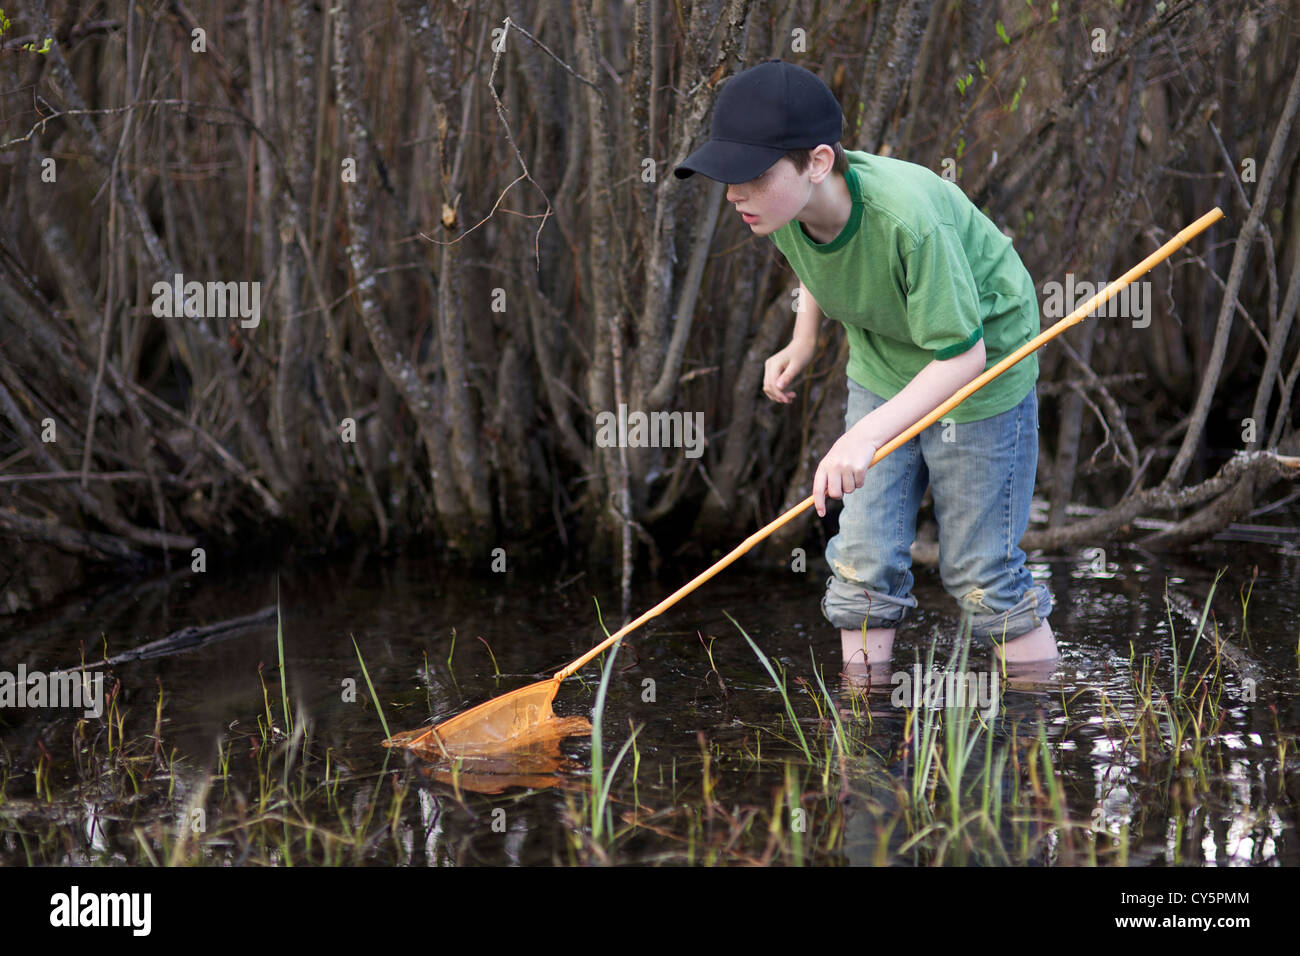 Young boy having fun catching frogs with frog net in the summer